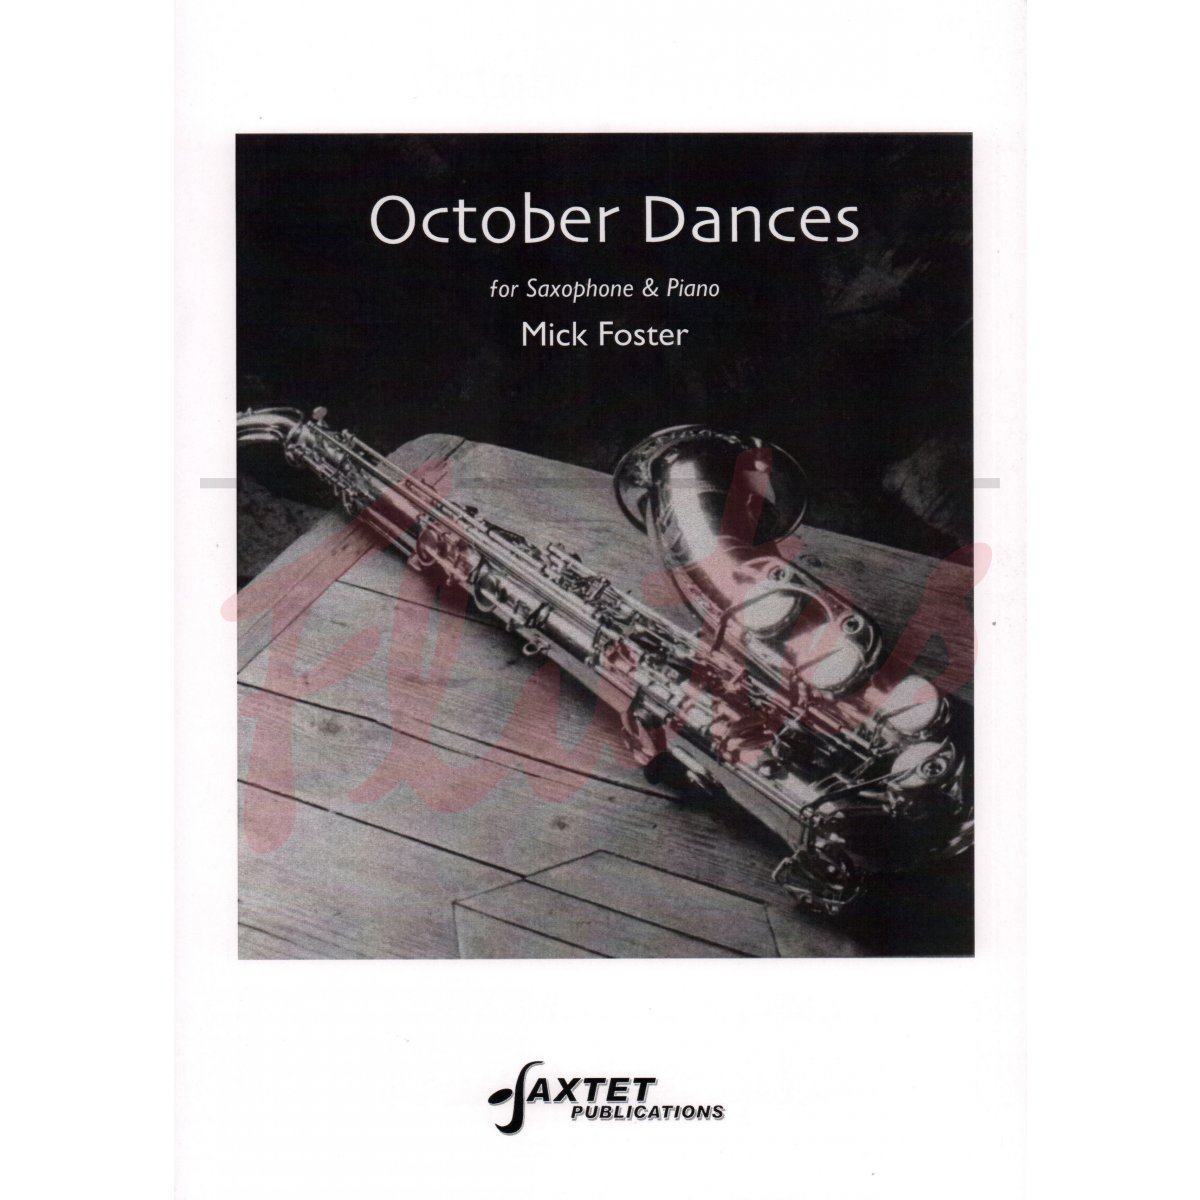 October Dances for Saxophone and Piano